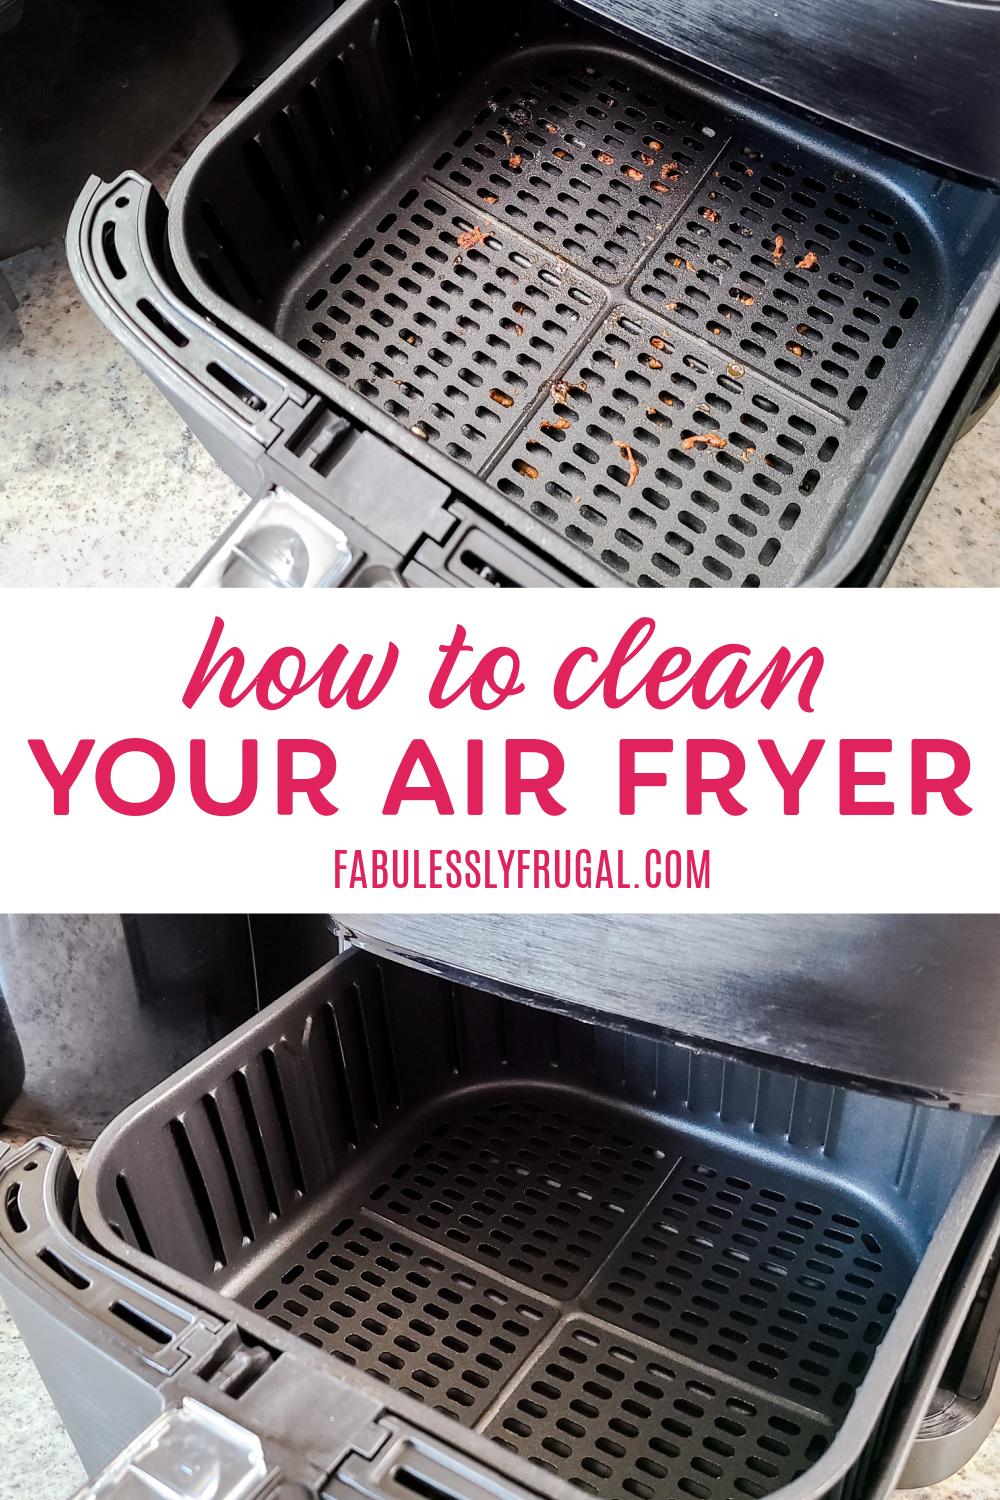 https://fabulesslyfrugal.com/wp-content/uploads/2021/02/how-to-clean-your-airfryer.png